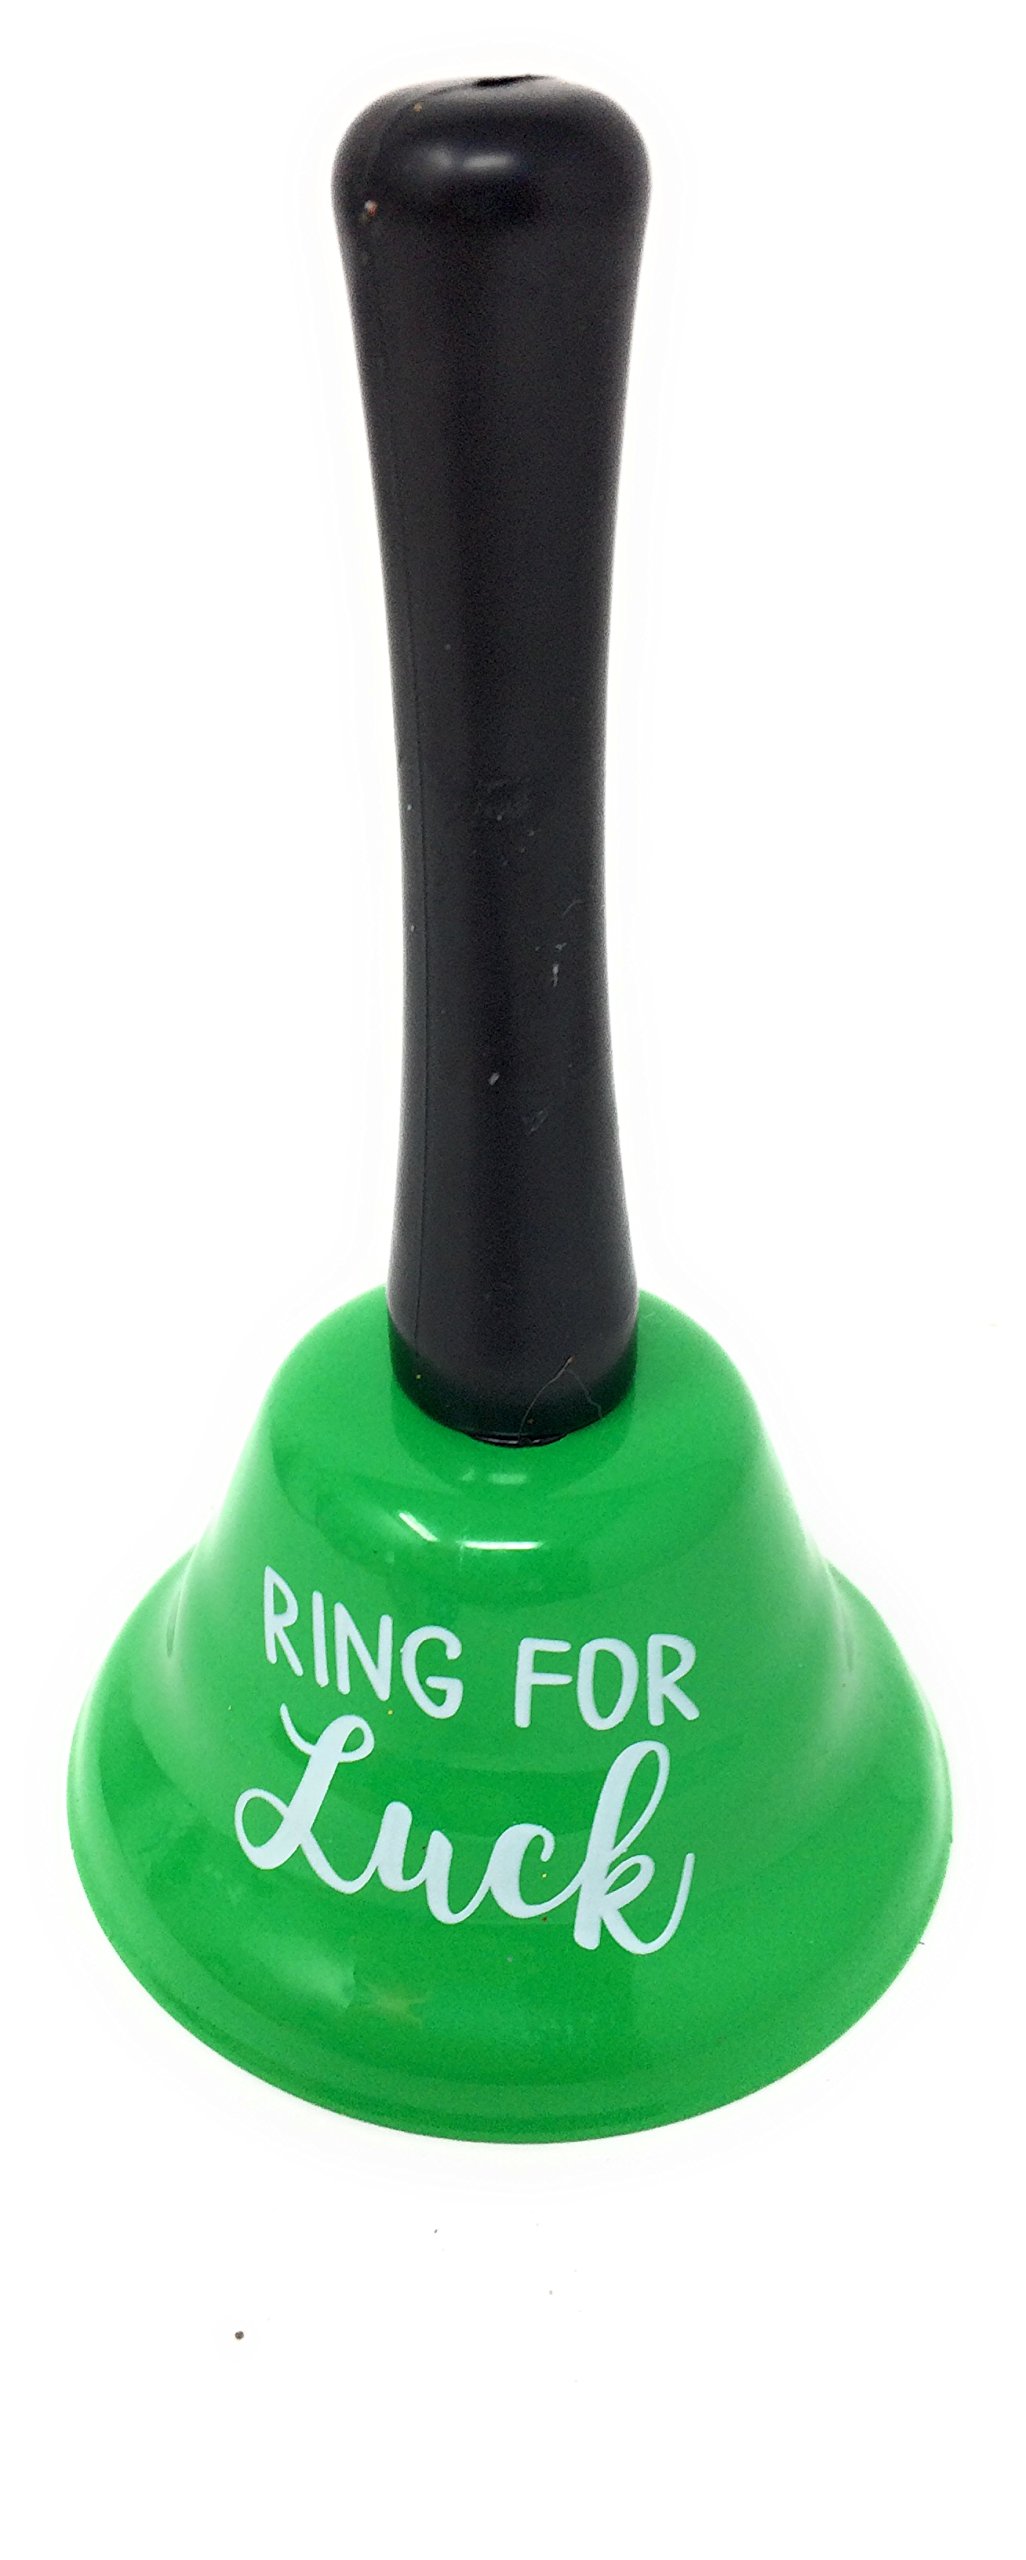 Bells Humorous Hand Loud Call With Fun Quotes, 45 (Ring For Luck)